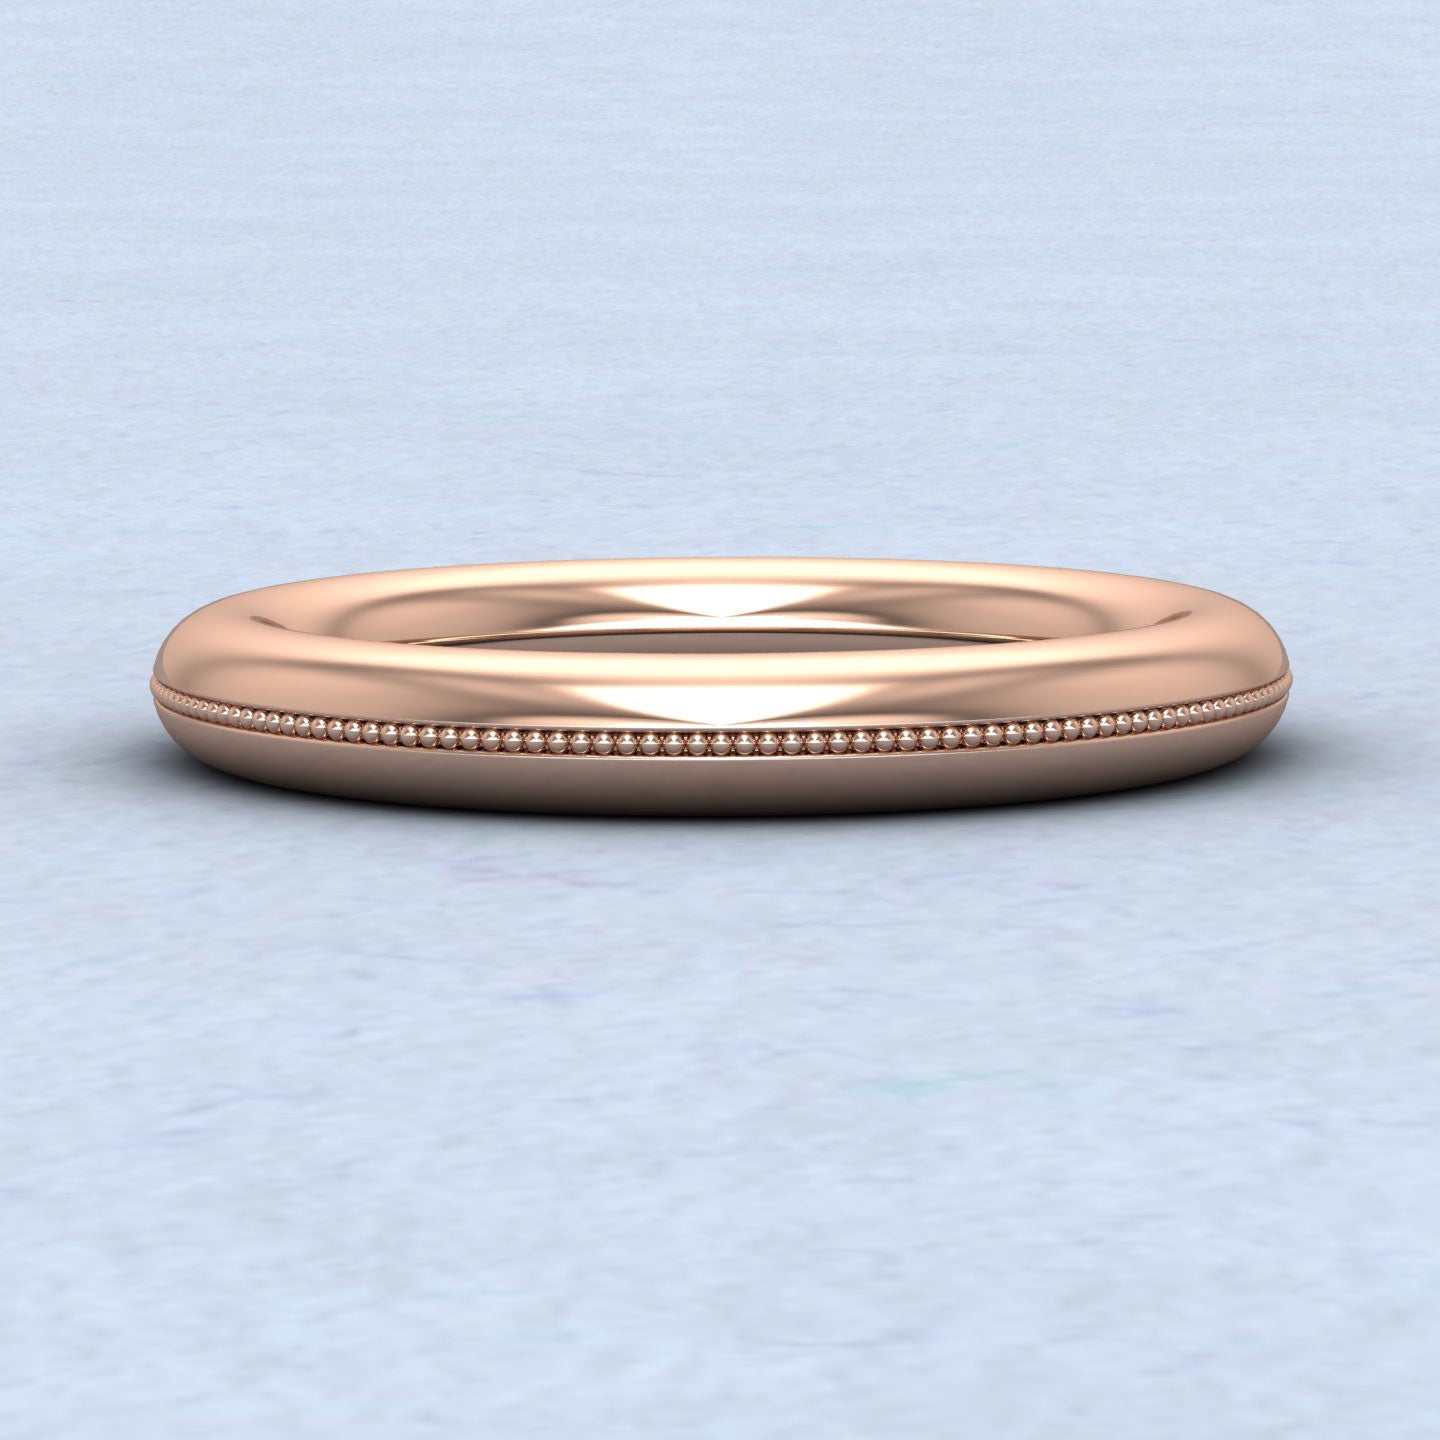 Millgrain Patterned 18ct Rose Gold 3mm Halo Wedding Ring